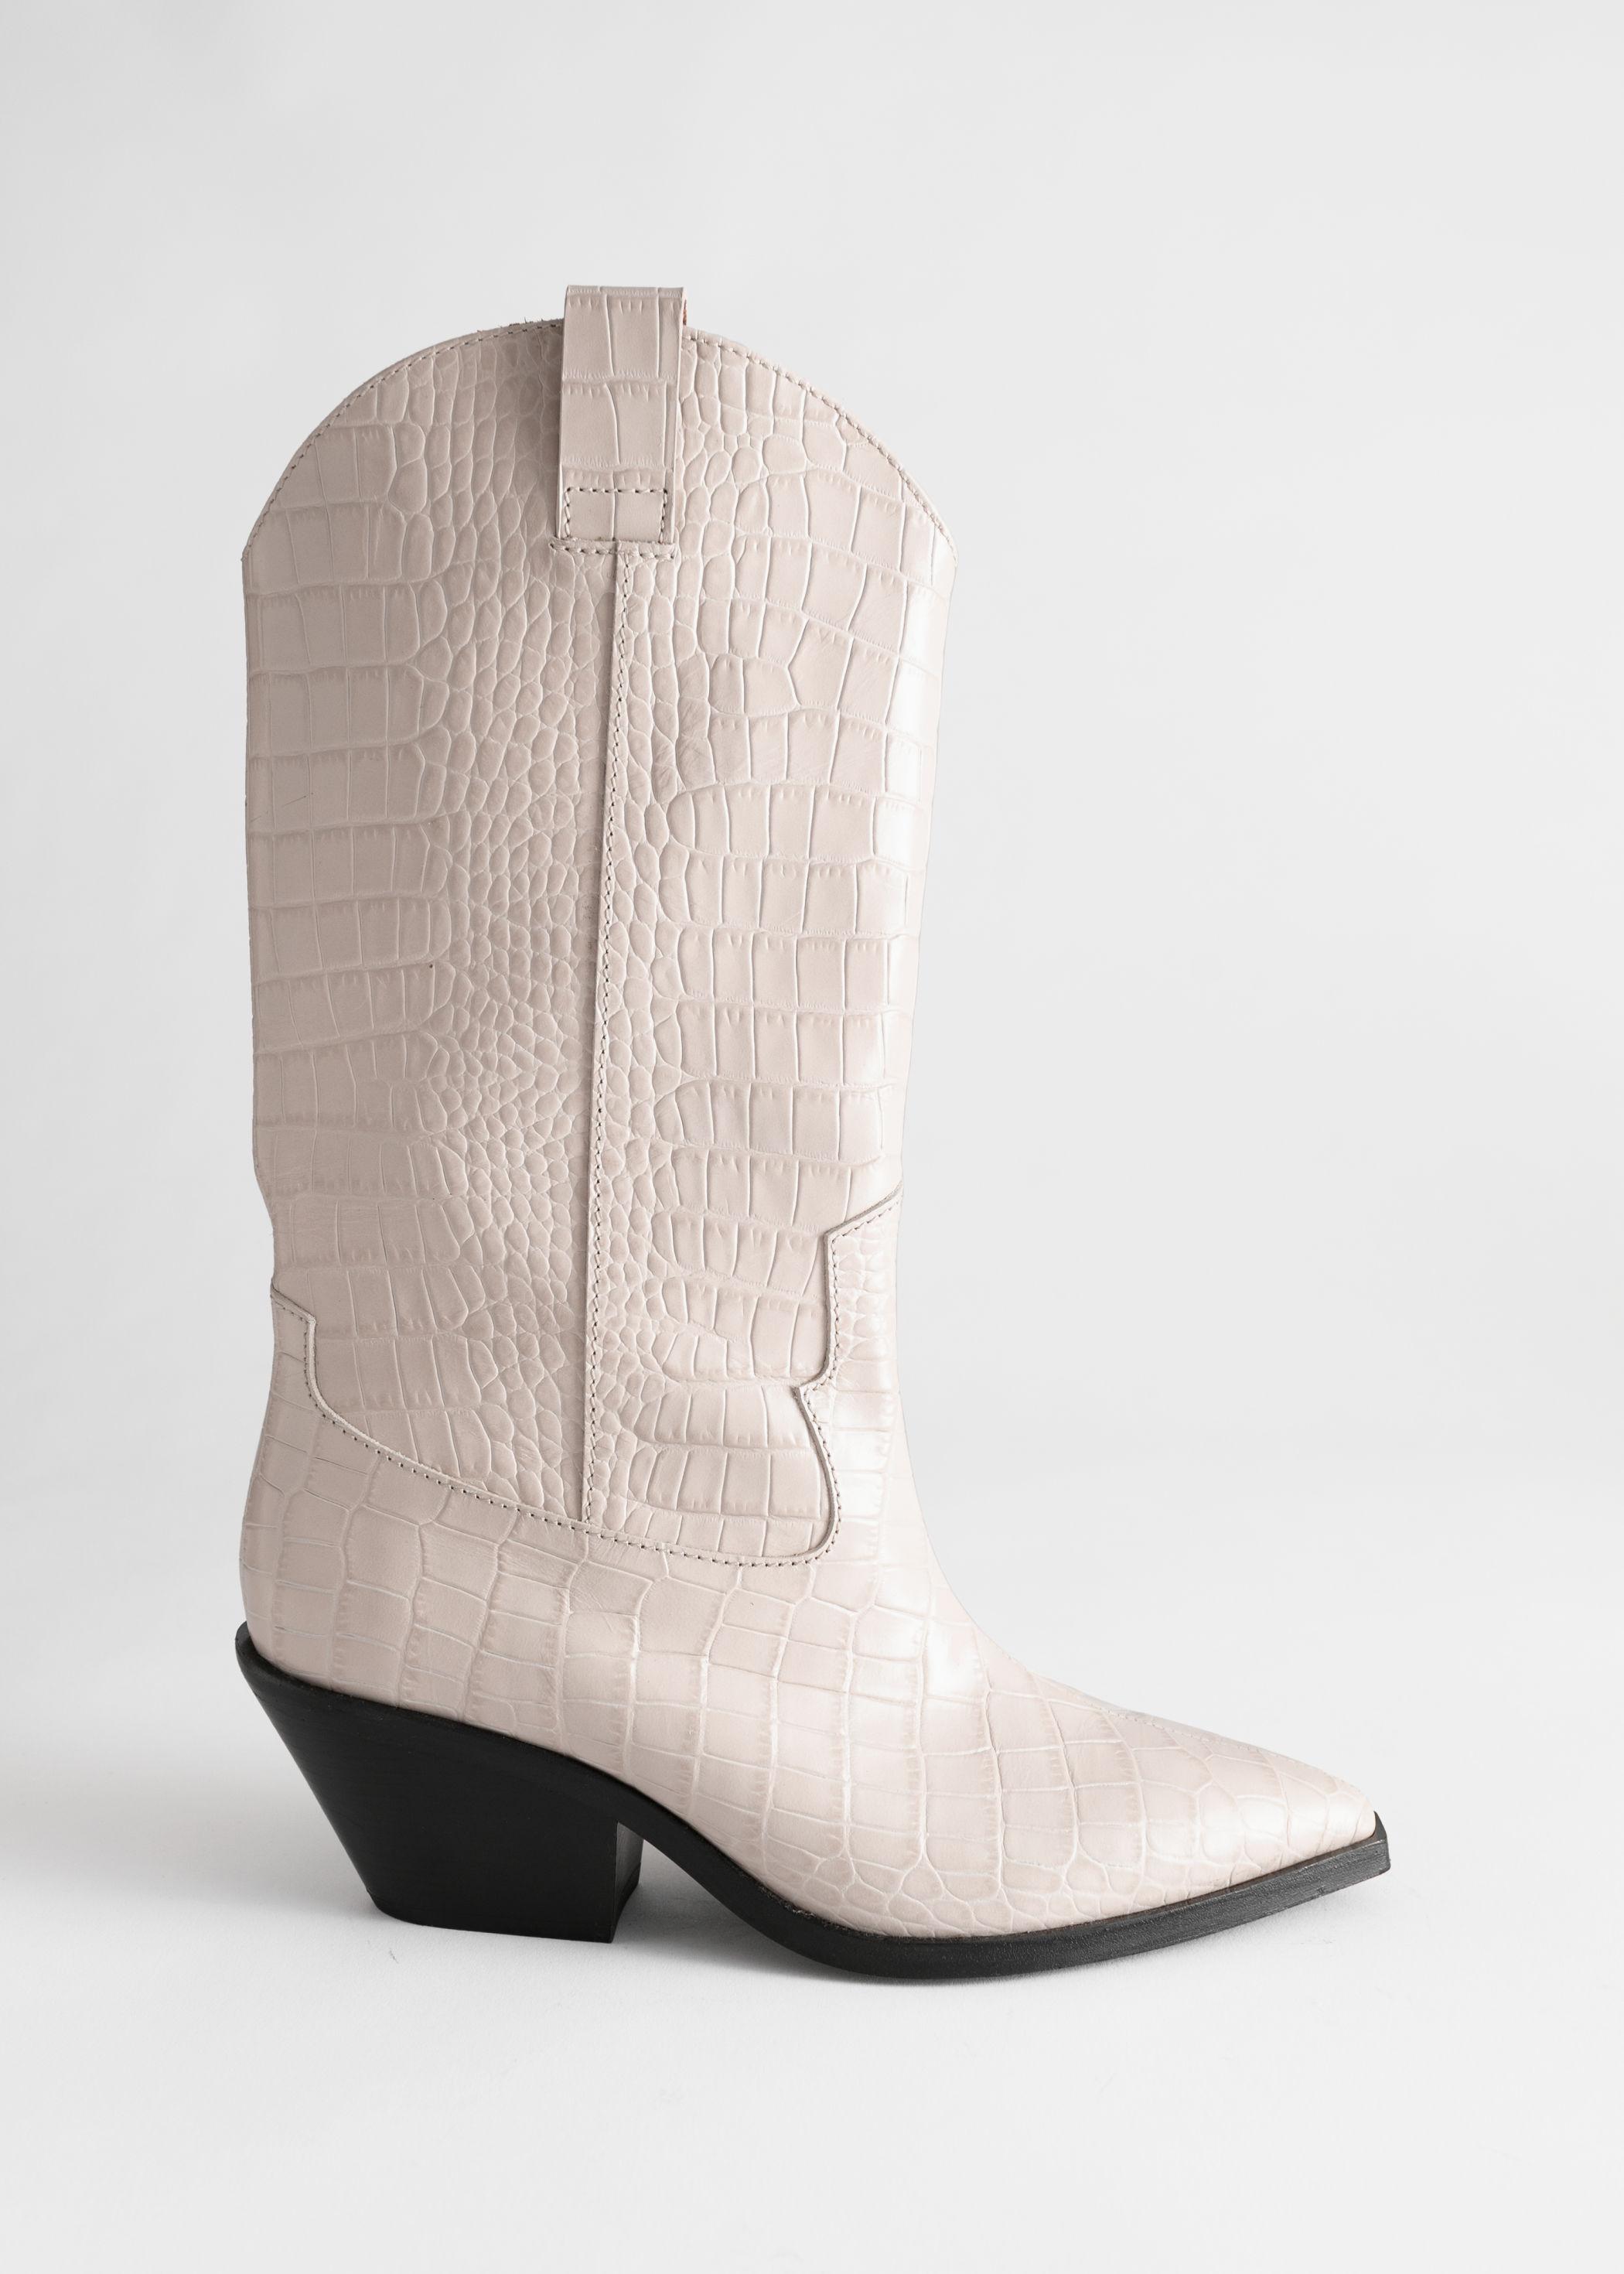 & Other Stories Croc Leather Cowboy Boots in White | Lyst